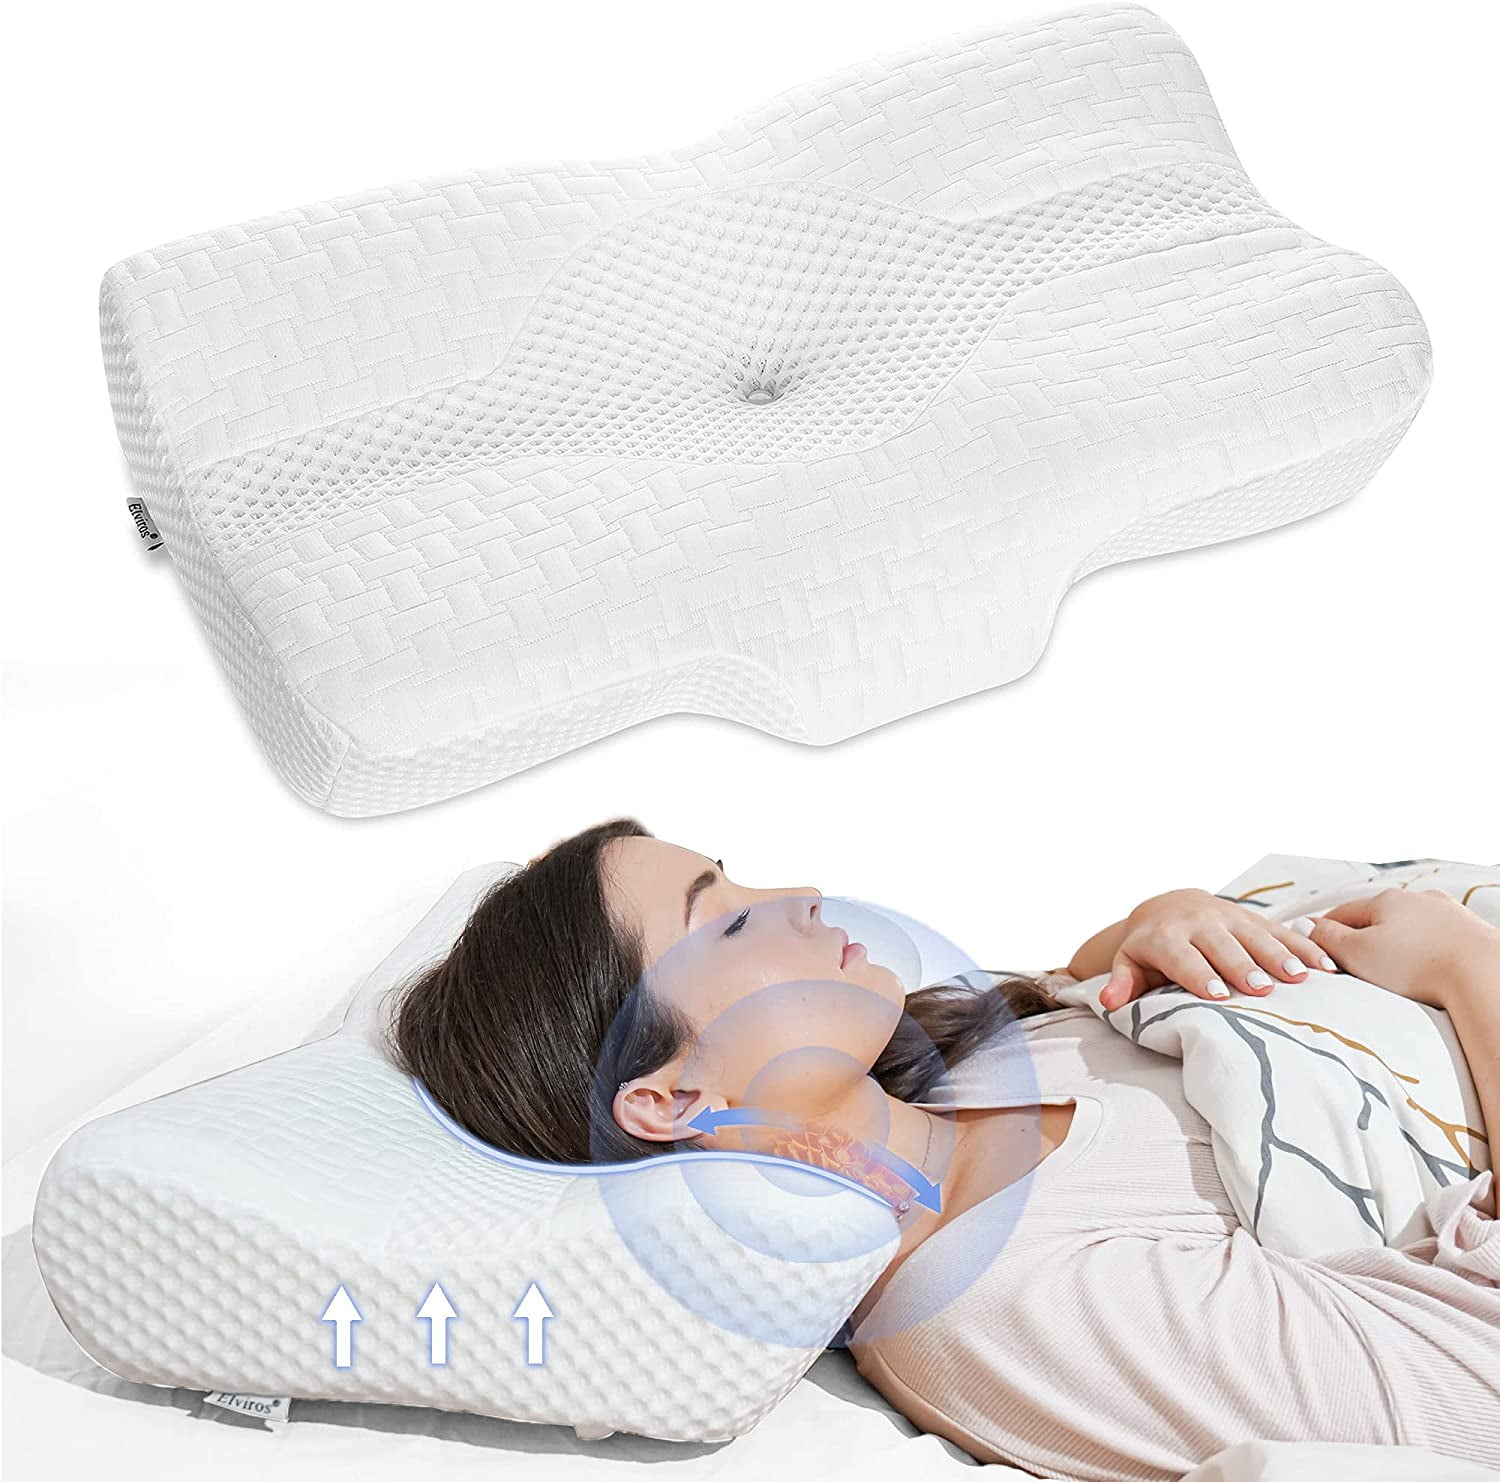 Memory Foam Sleeping Pillow Contour Cervical Orthopedic Neck Support Pillows 